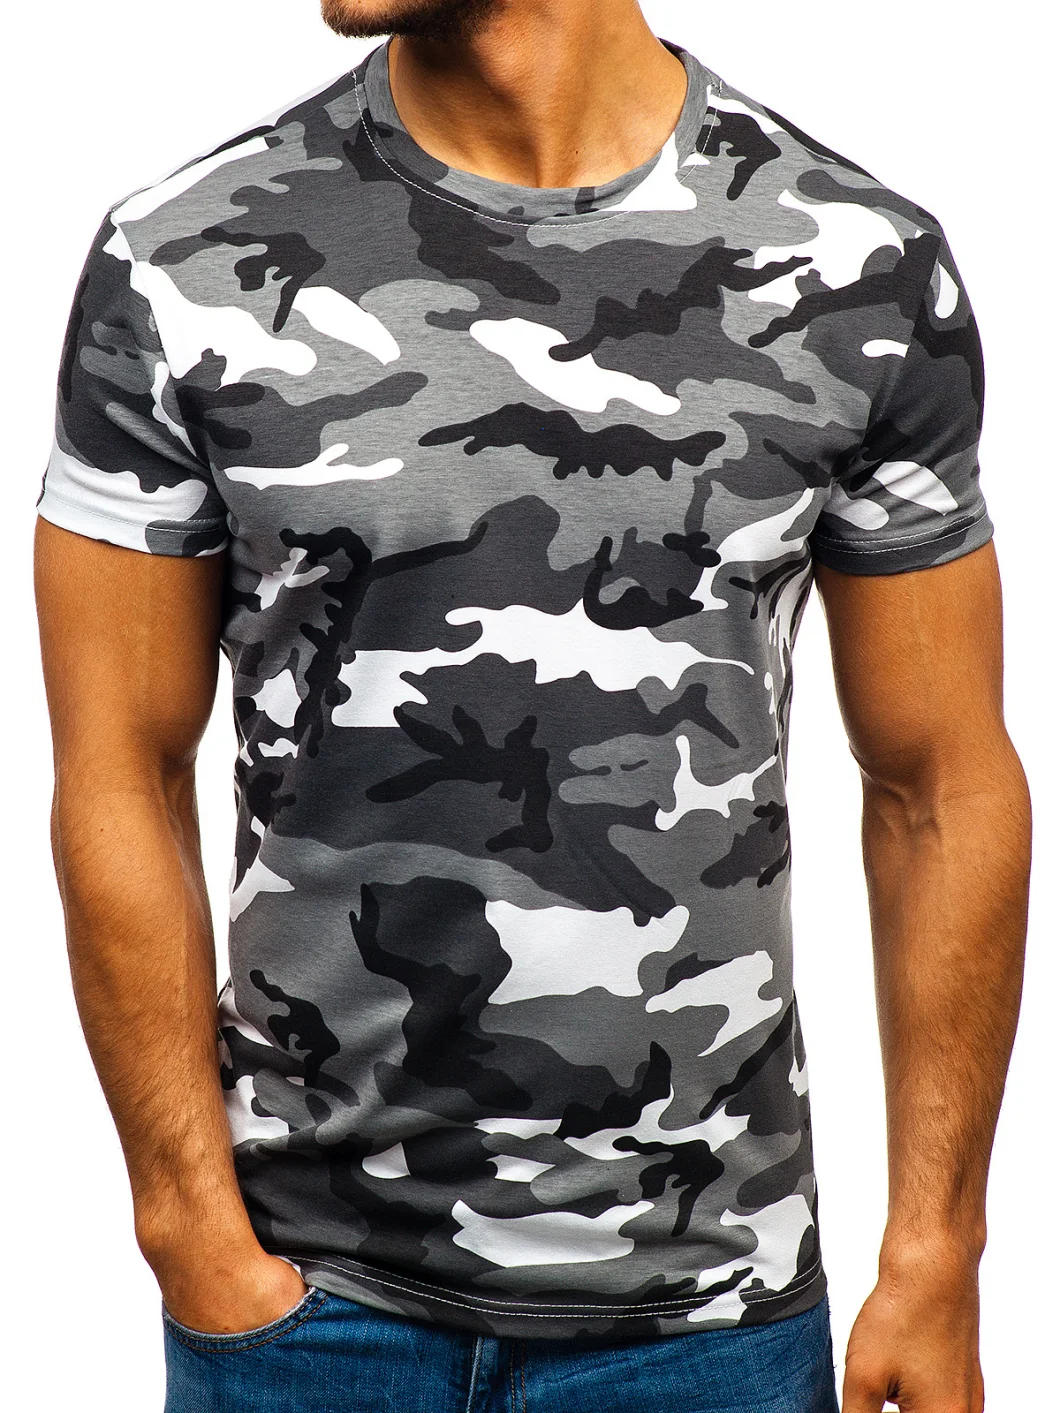 Men's Short-Sleeved Shirt Camouflage Round Neck T-Shirt Casual Clothes